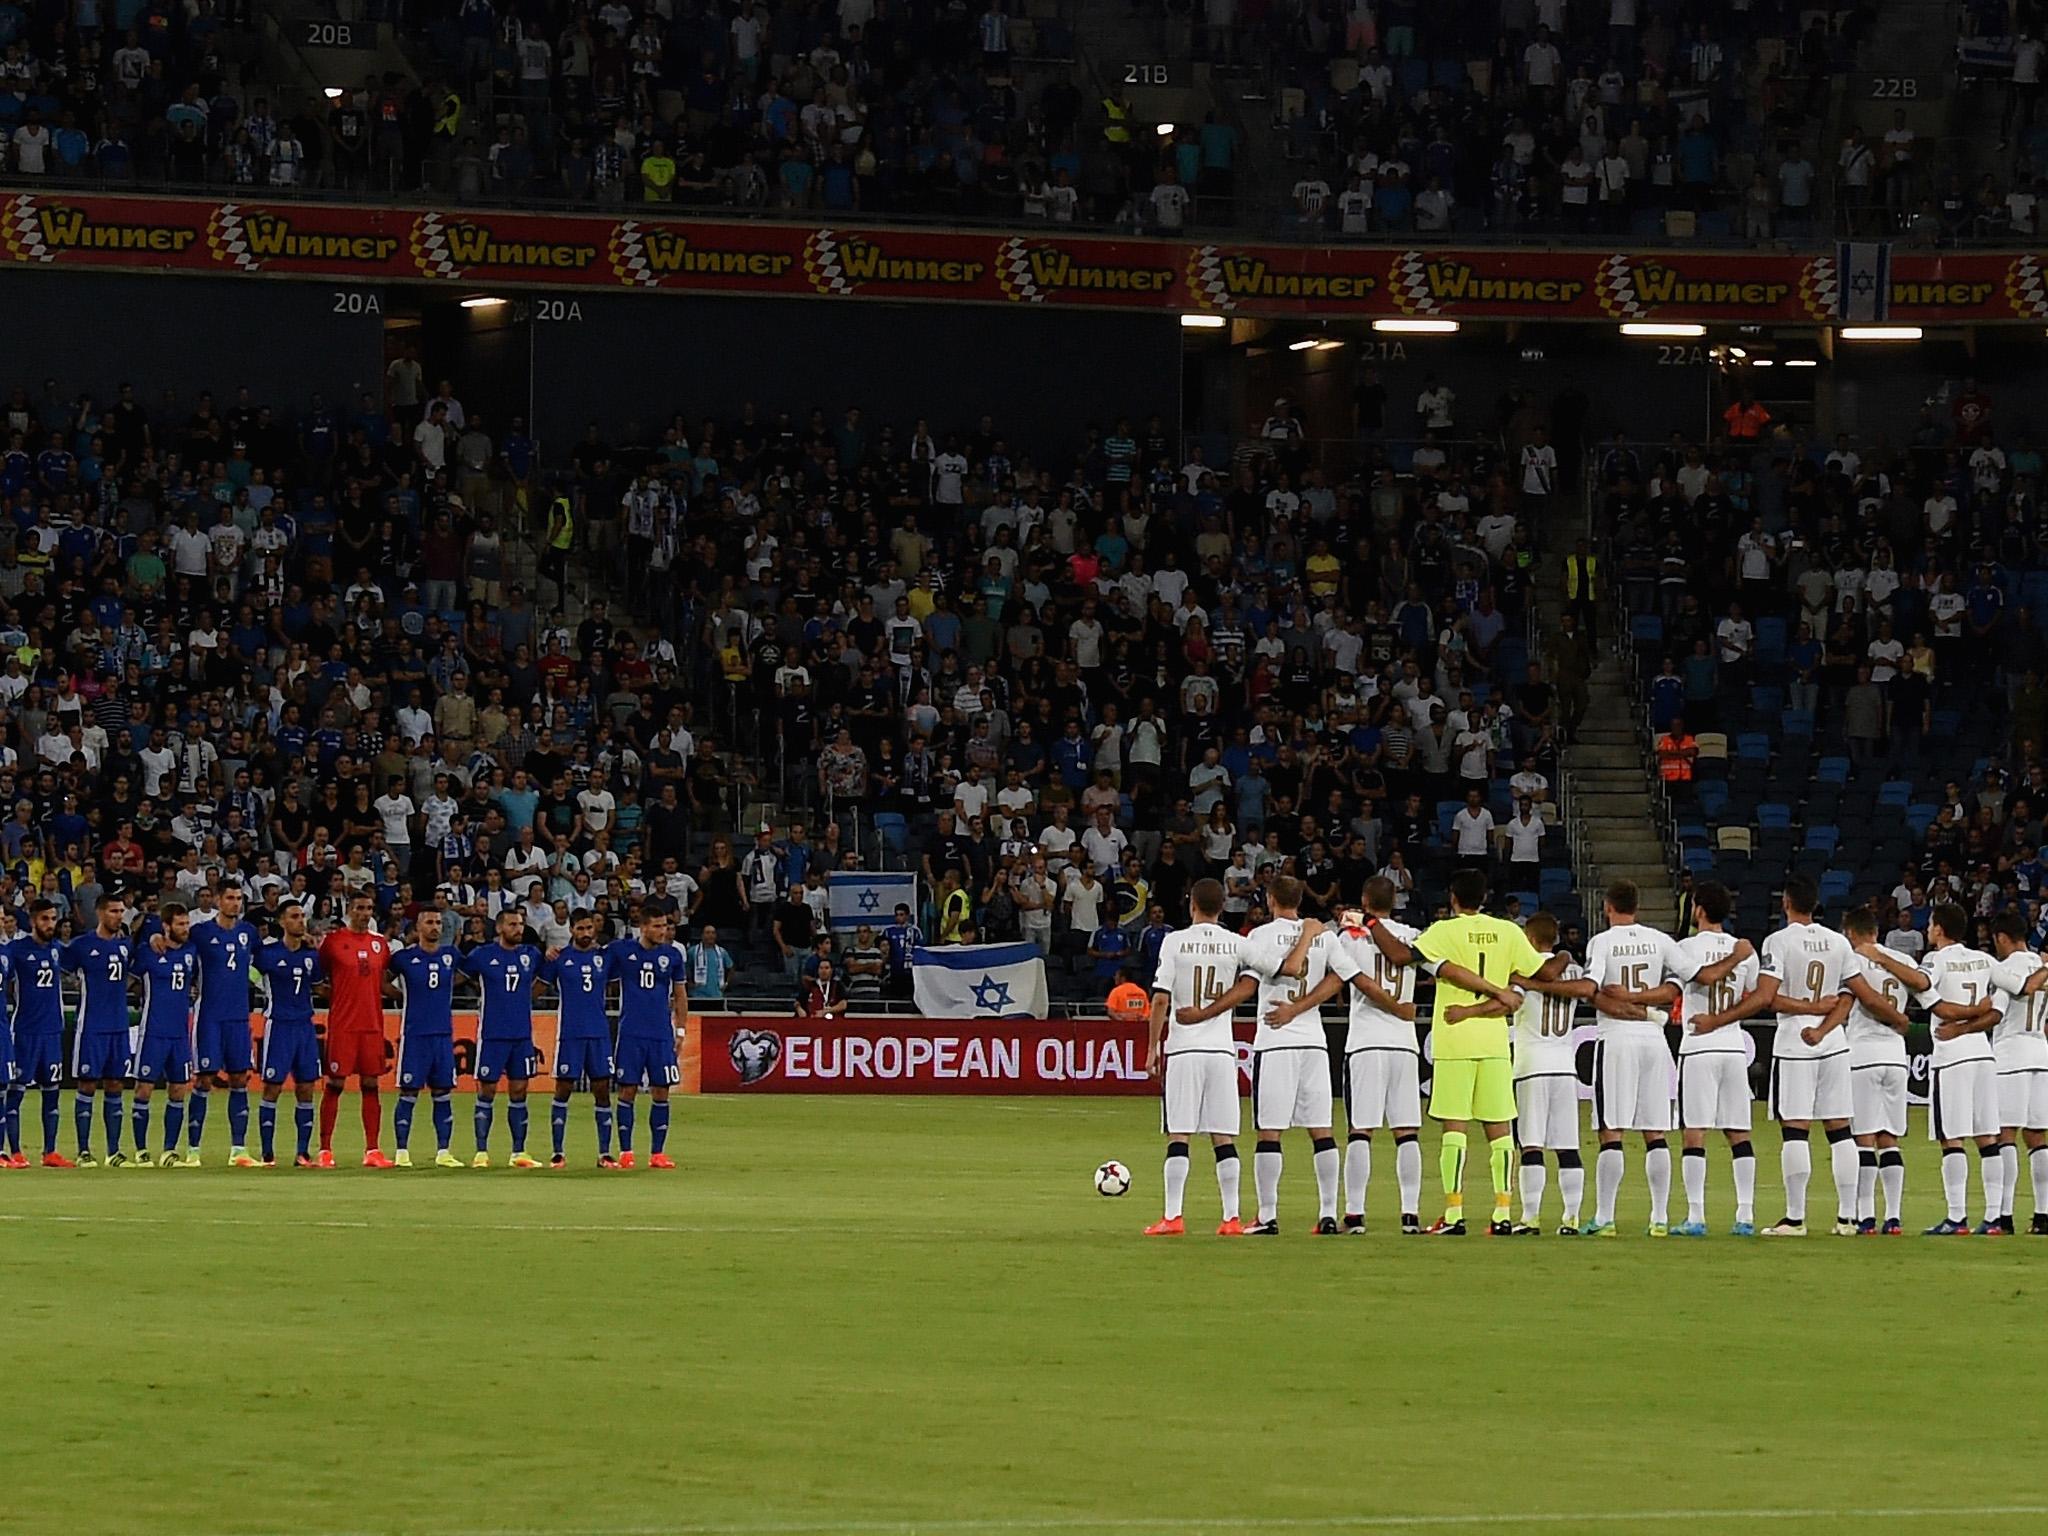 Italian fans were heard booing the Israeli national anthem as the two teams listened